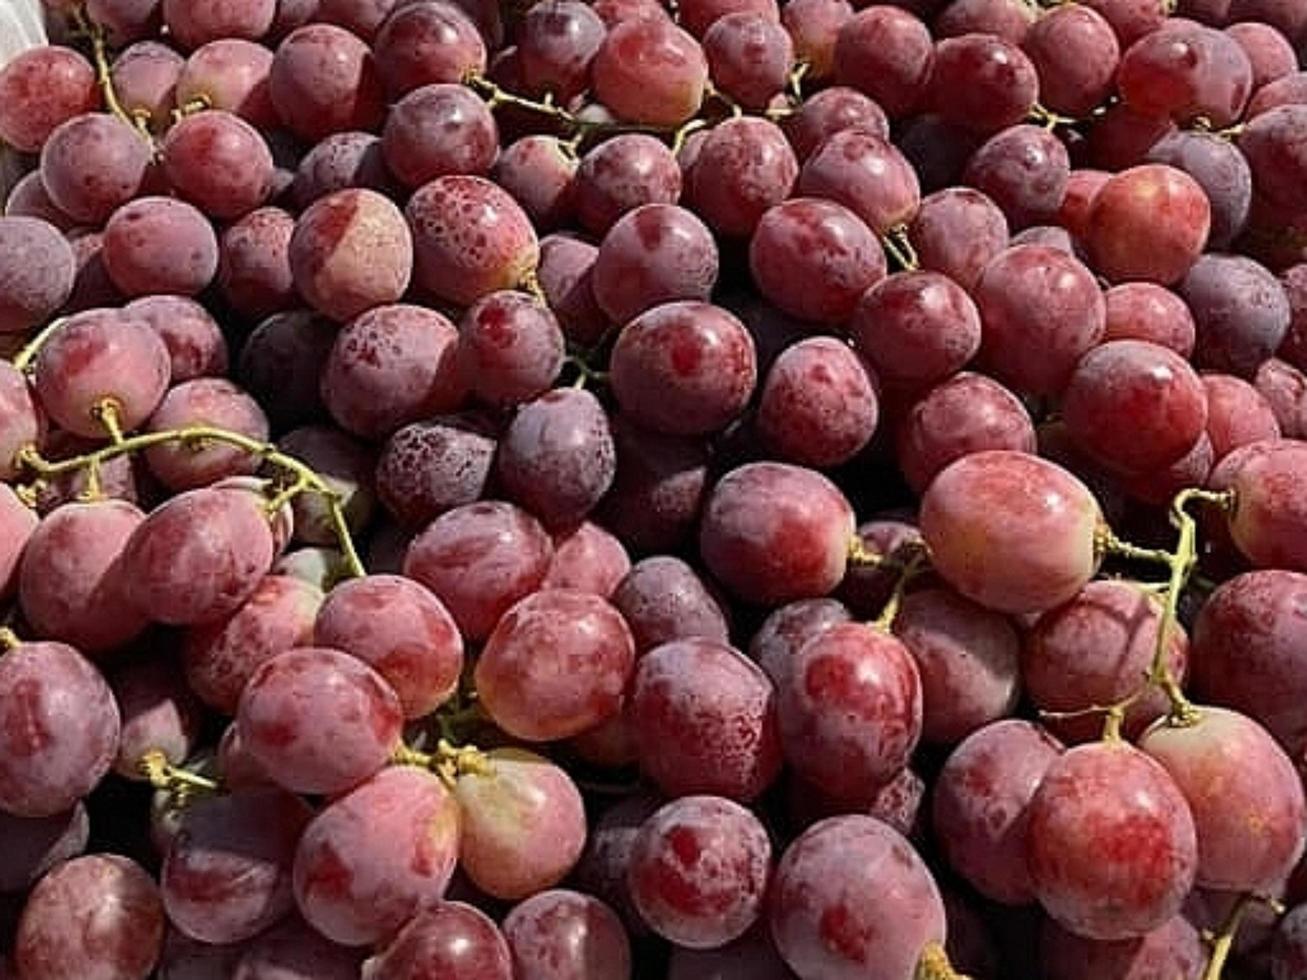 sweet grapes ready to eat photo